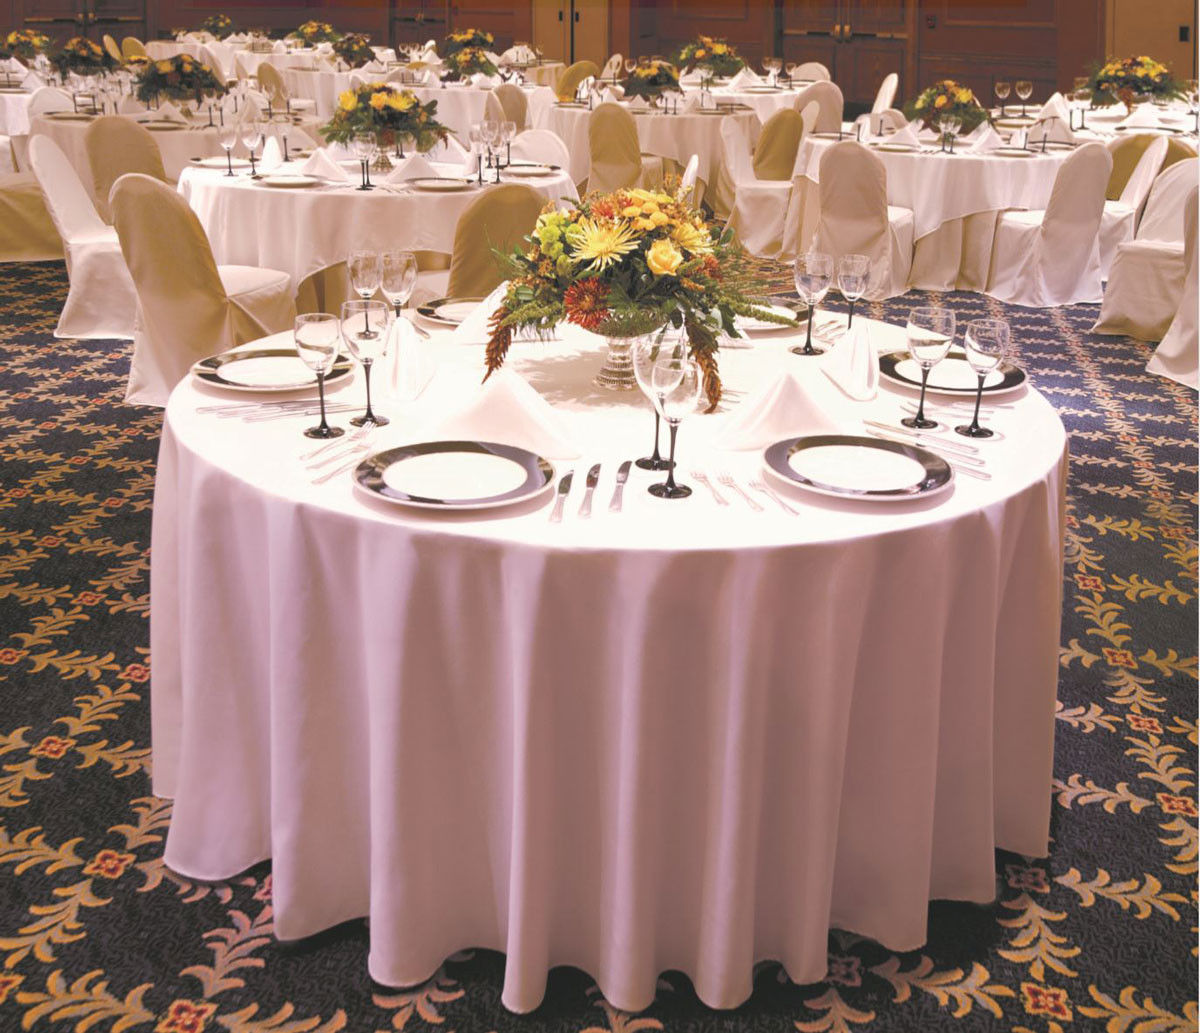 How does the 132 inch round tablecloth from Milliken Horizon influence large event ambiance?